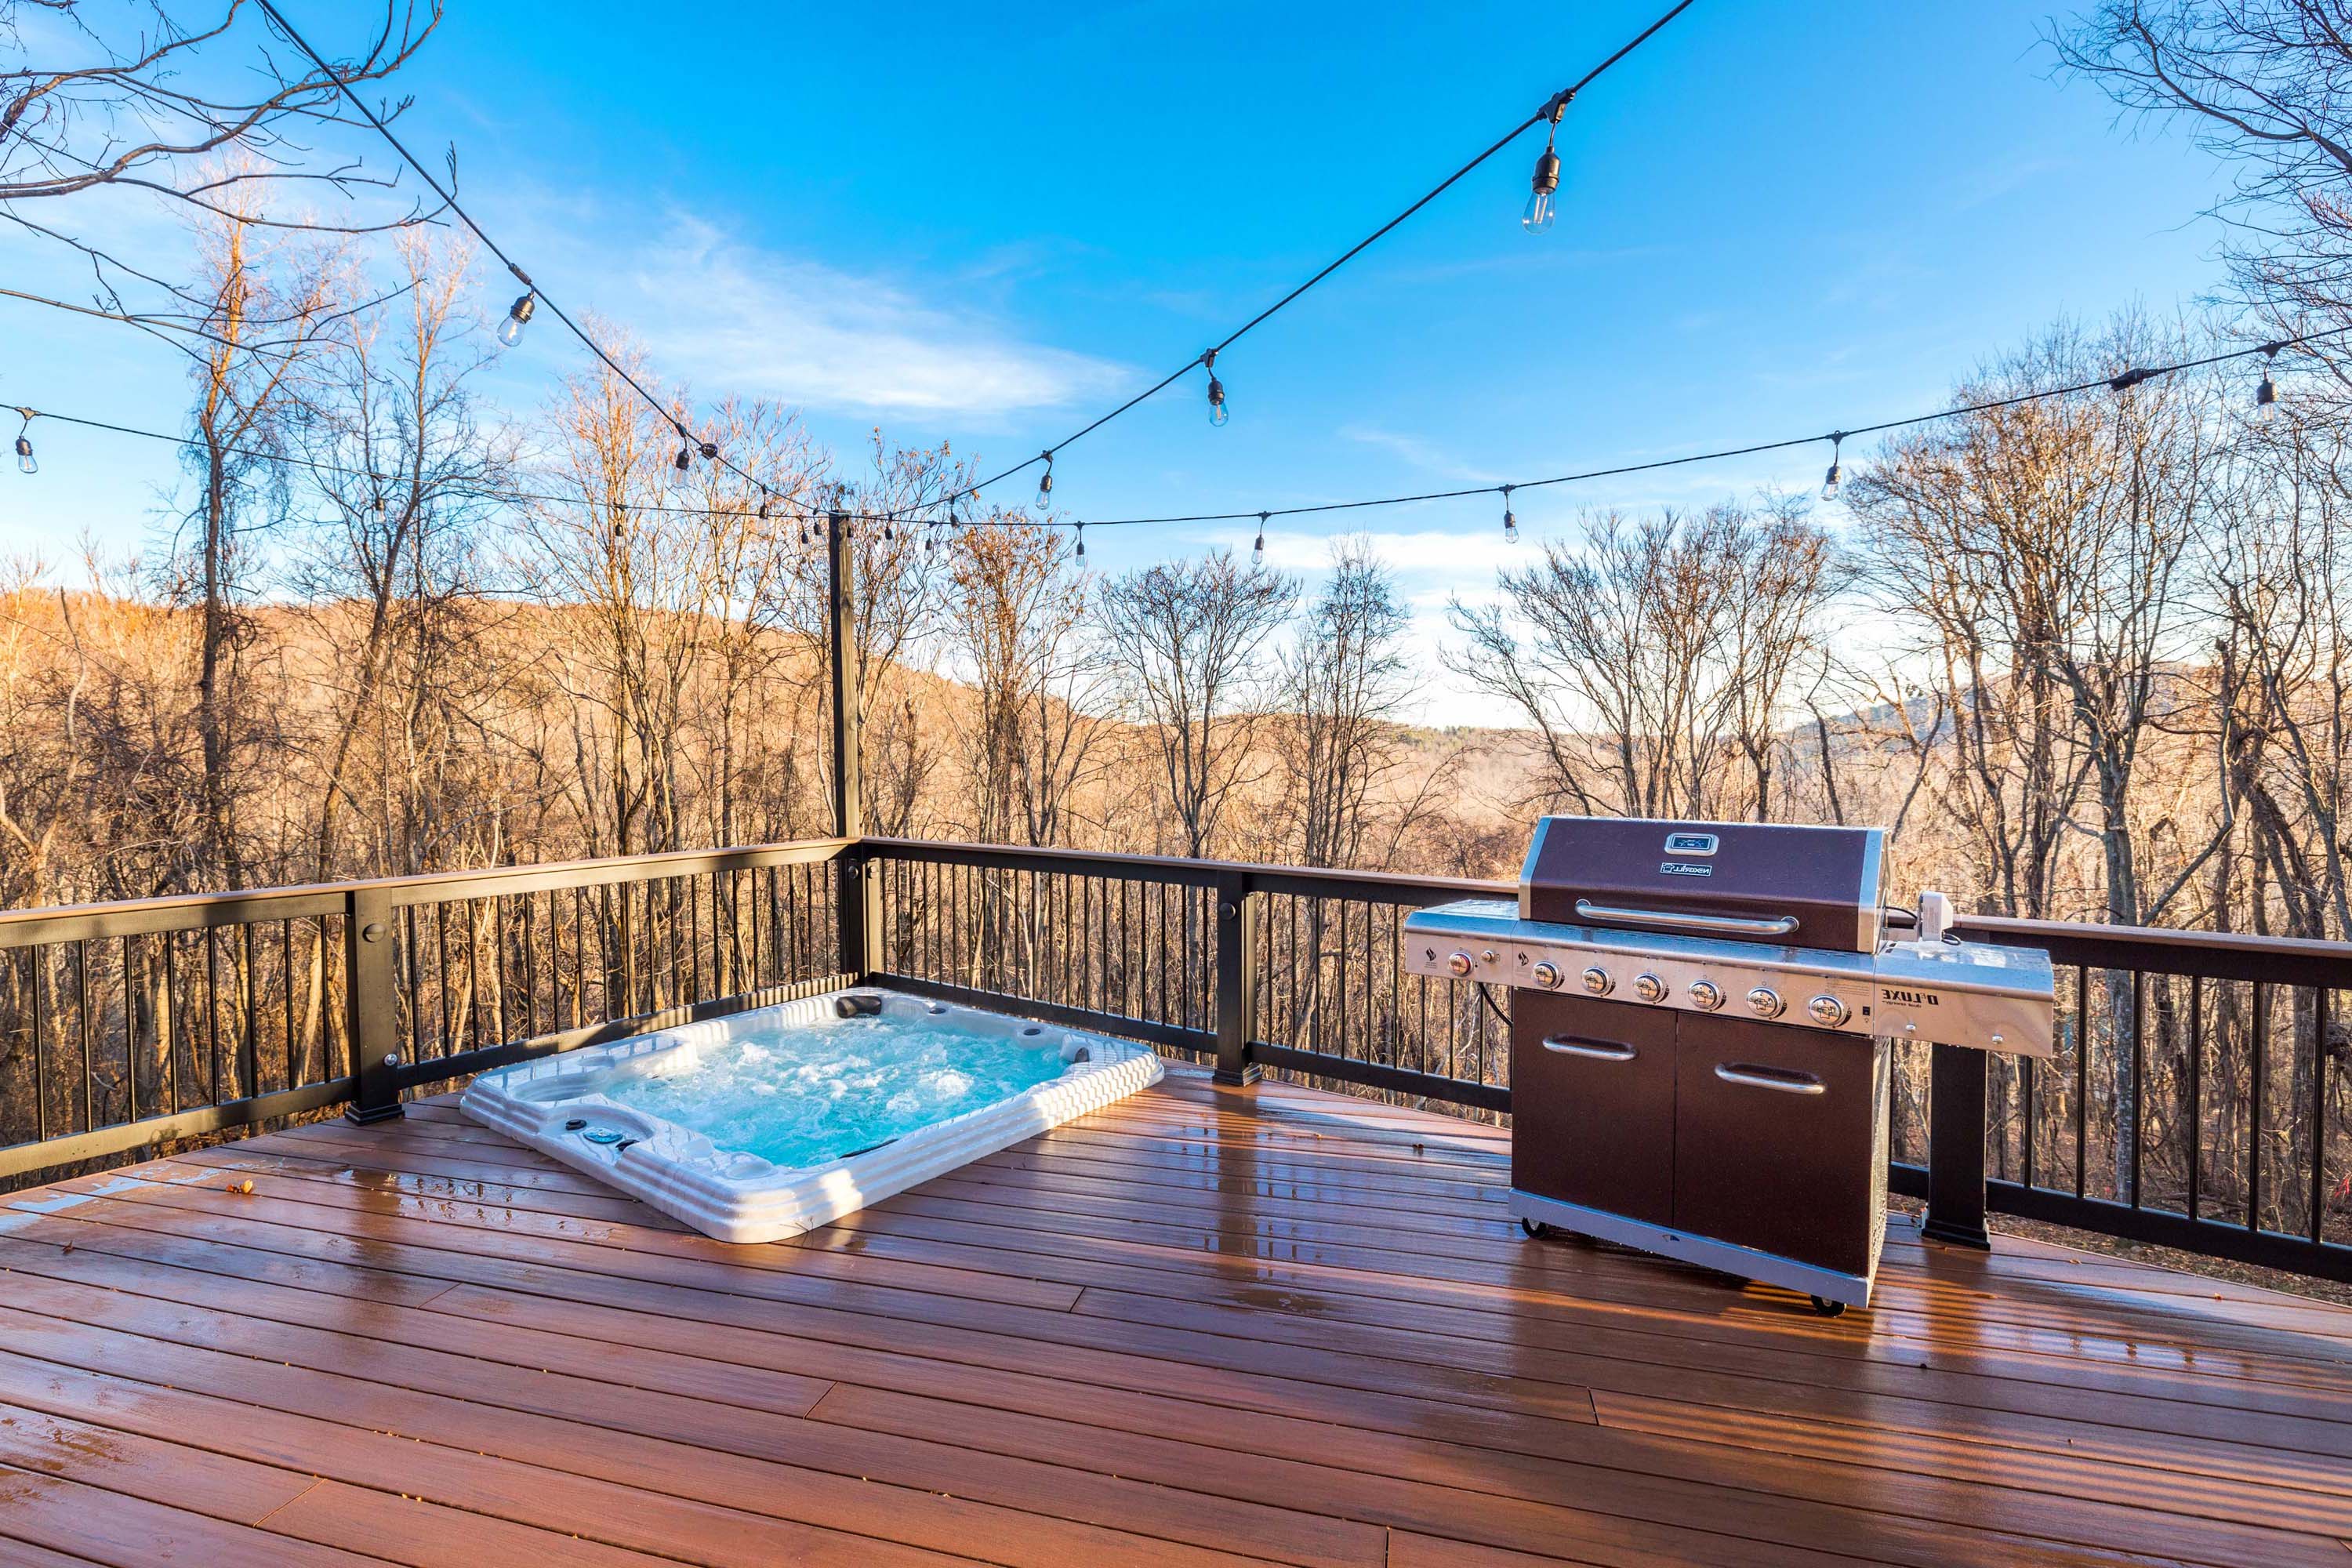 <span  class="uc_style_uc_tiles_grid_image_elementor_uc_items_attribute_title" style="color:#ffffff;">Large grill and 7 person Hot Tub with Bluetooth speakers</span>